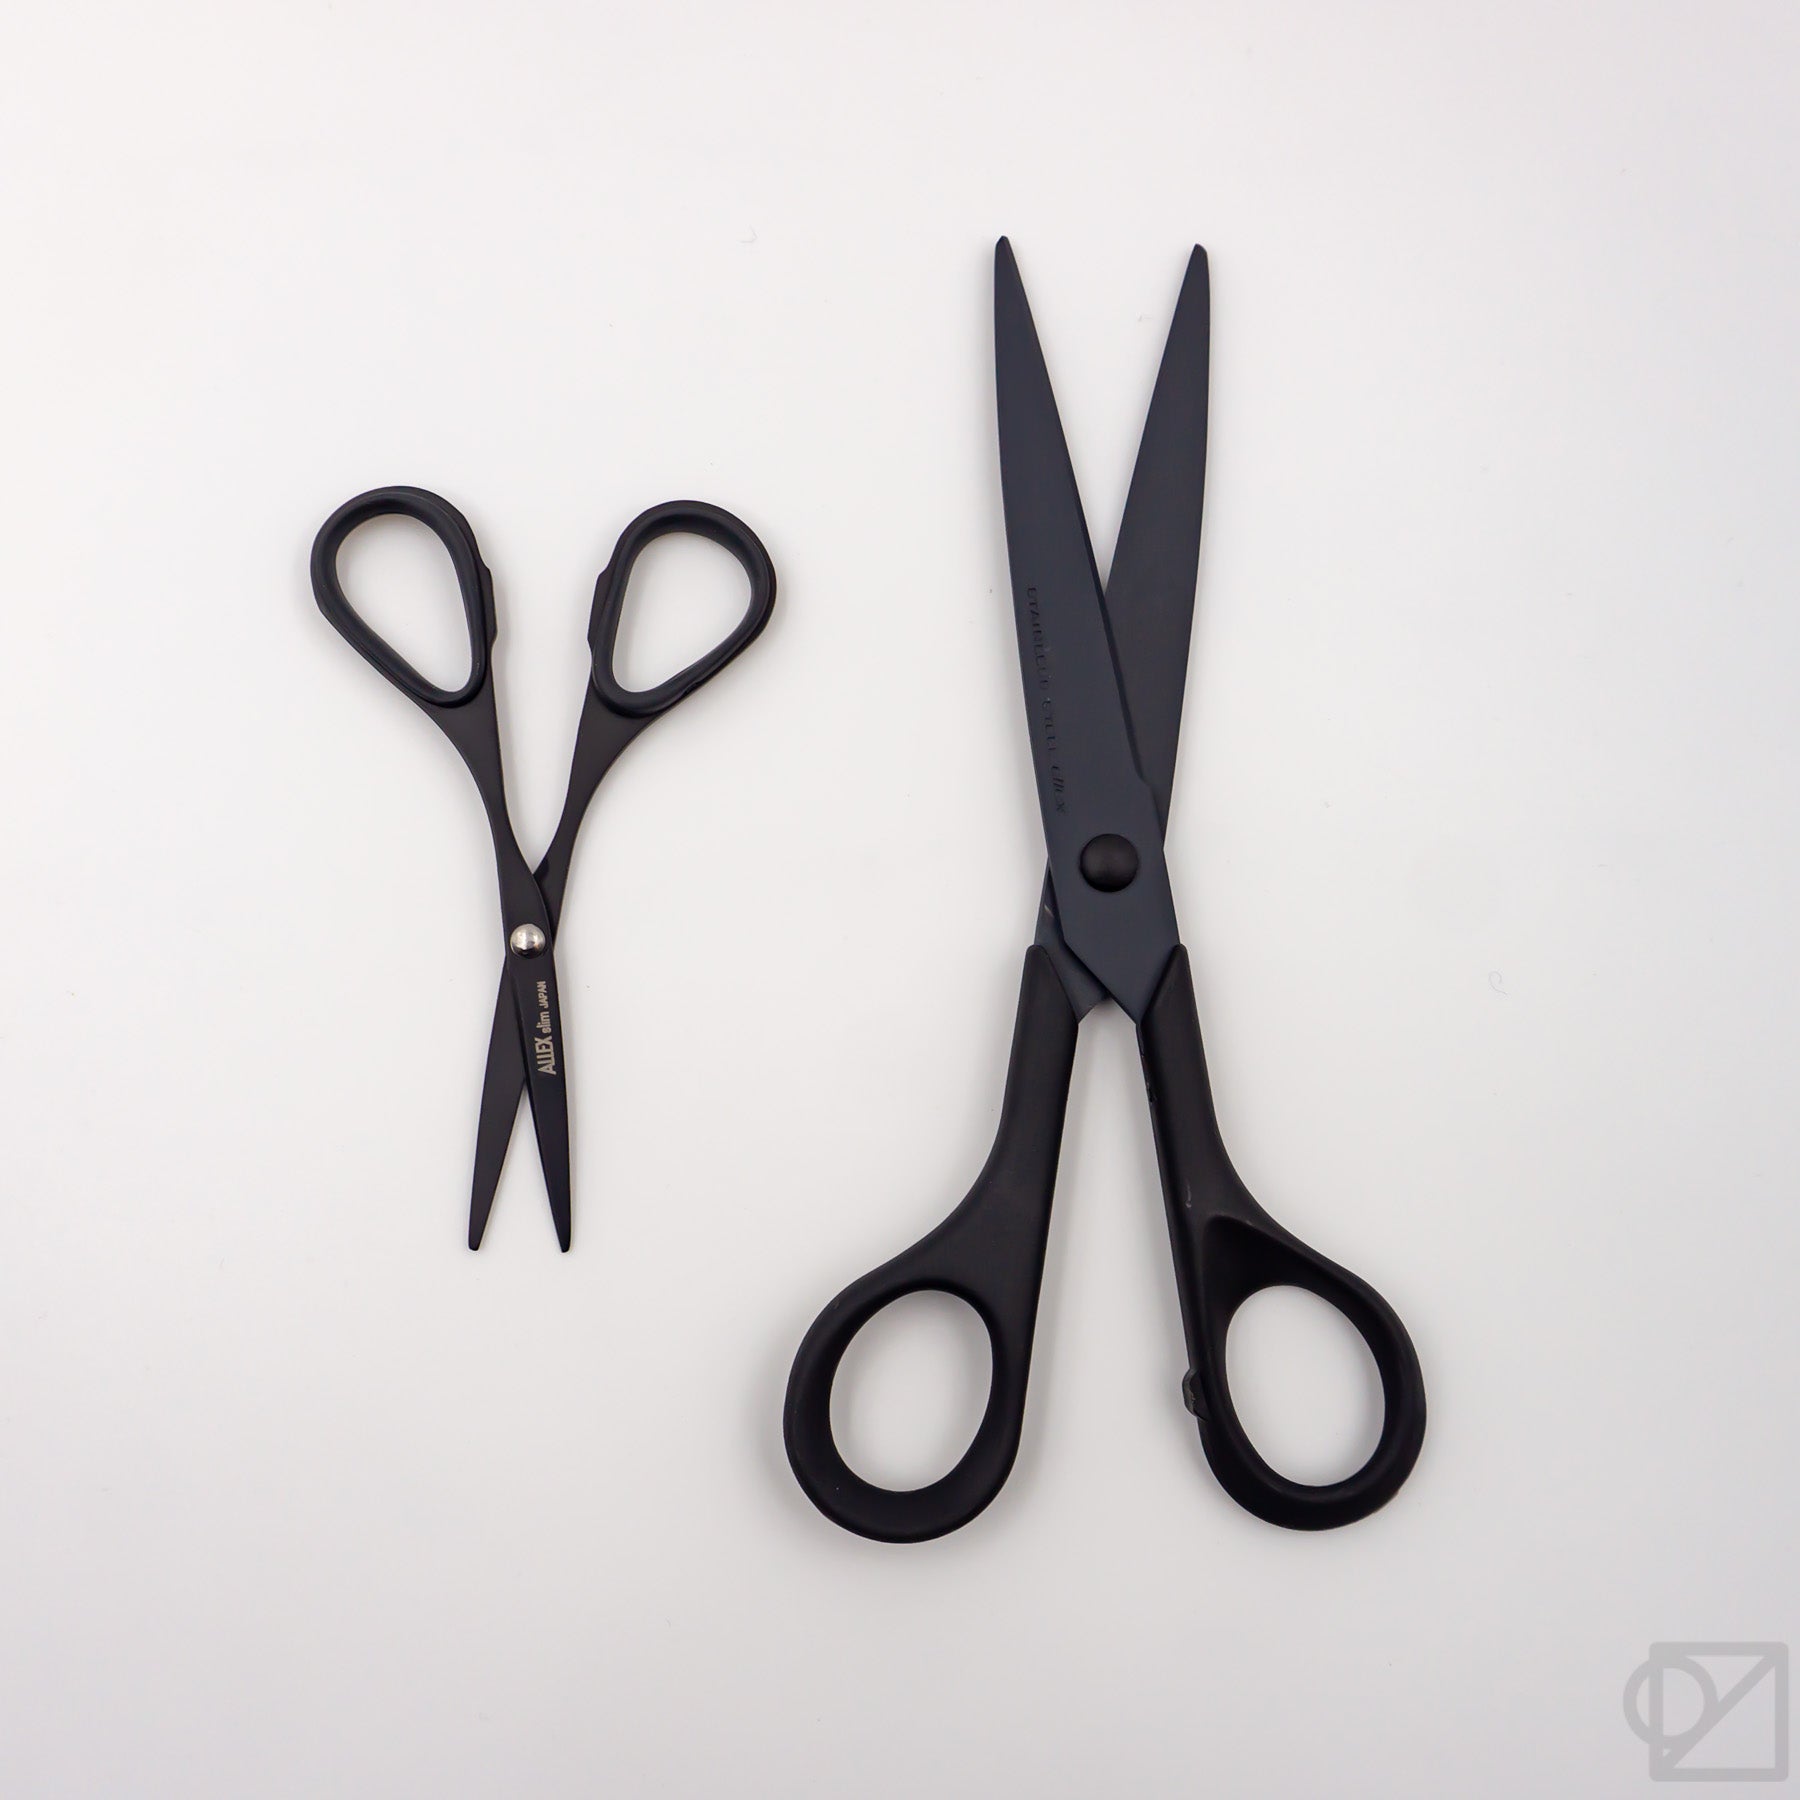  ALLEX Black Office Scissors for Desk, Medium 6.5 All Purpose  Non Stick Scissors, Made in JAPAN, All Metal Sharp Japanese Stainless Steel  Blade with Non-Slip Soft Ring, Black : Office Products